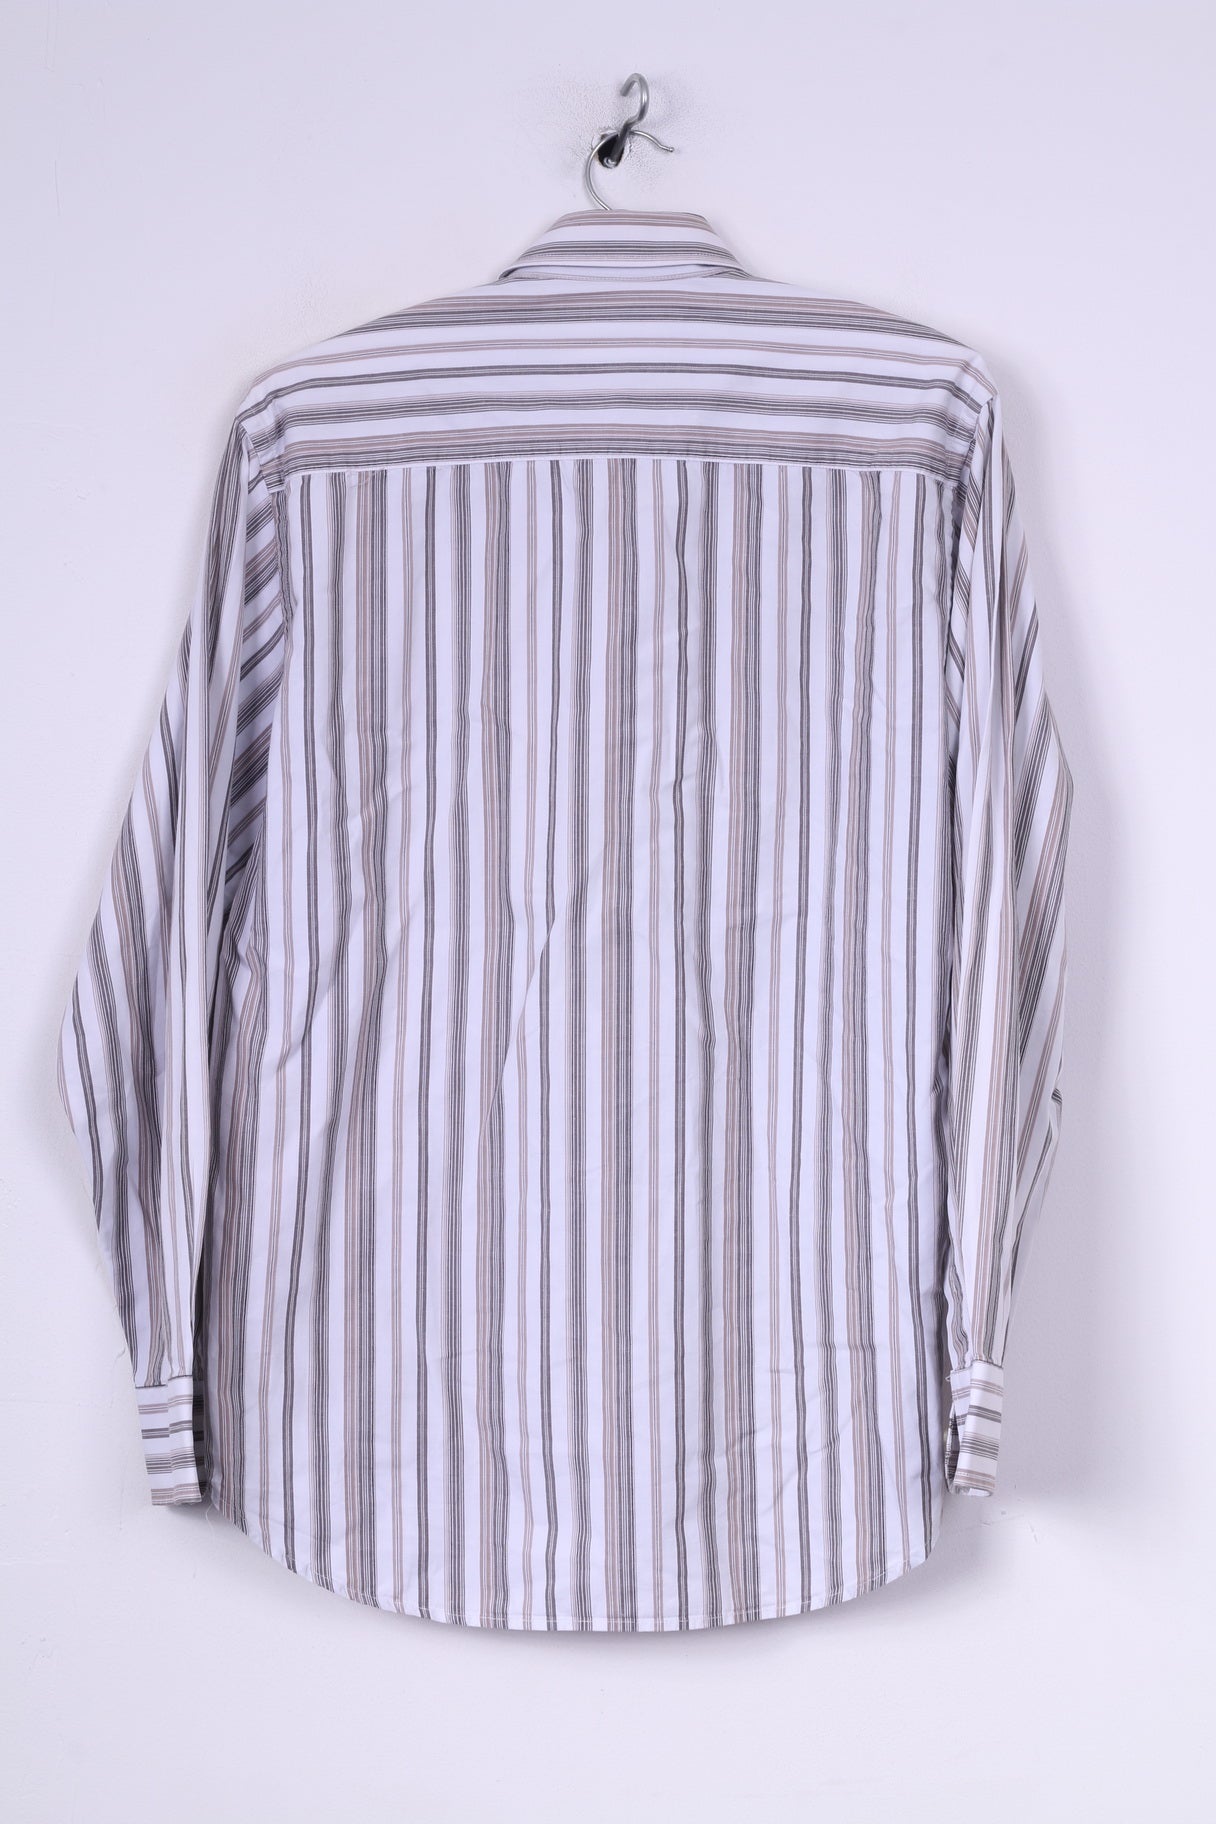 Lerros Mens M Casual Shirt Striped White Long Sleeve Top Cotton